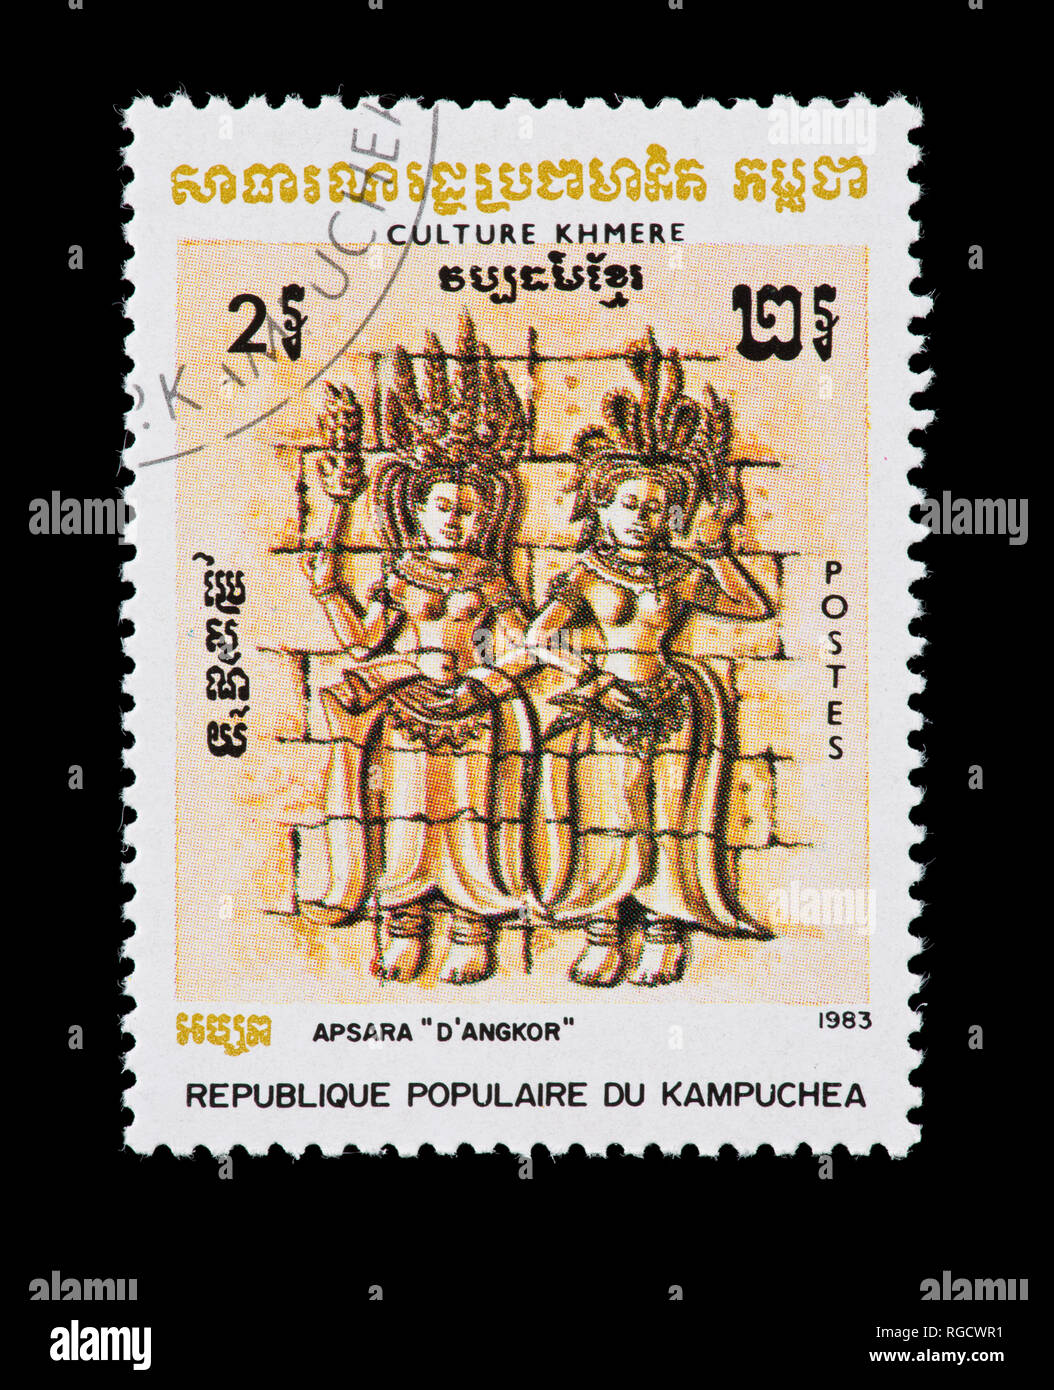 Postage stamp from Cambodia (Kampuchea) depicting Apsara, Angkor, issued for Khmer Culture. Stock Photo